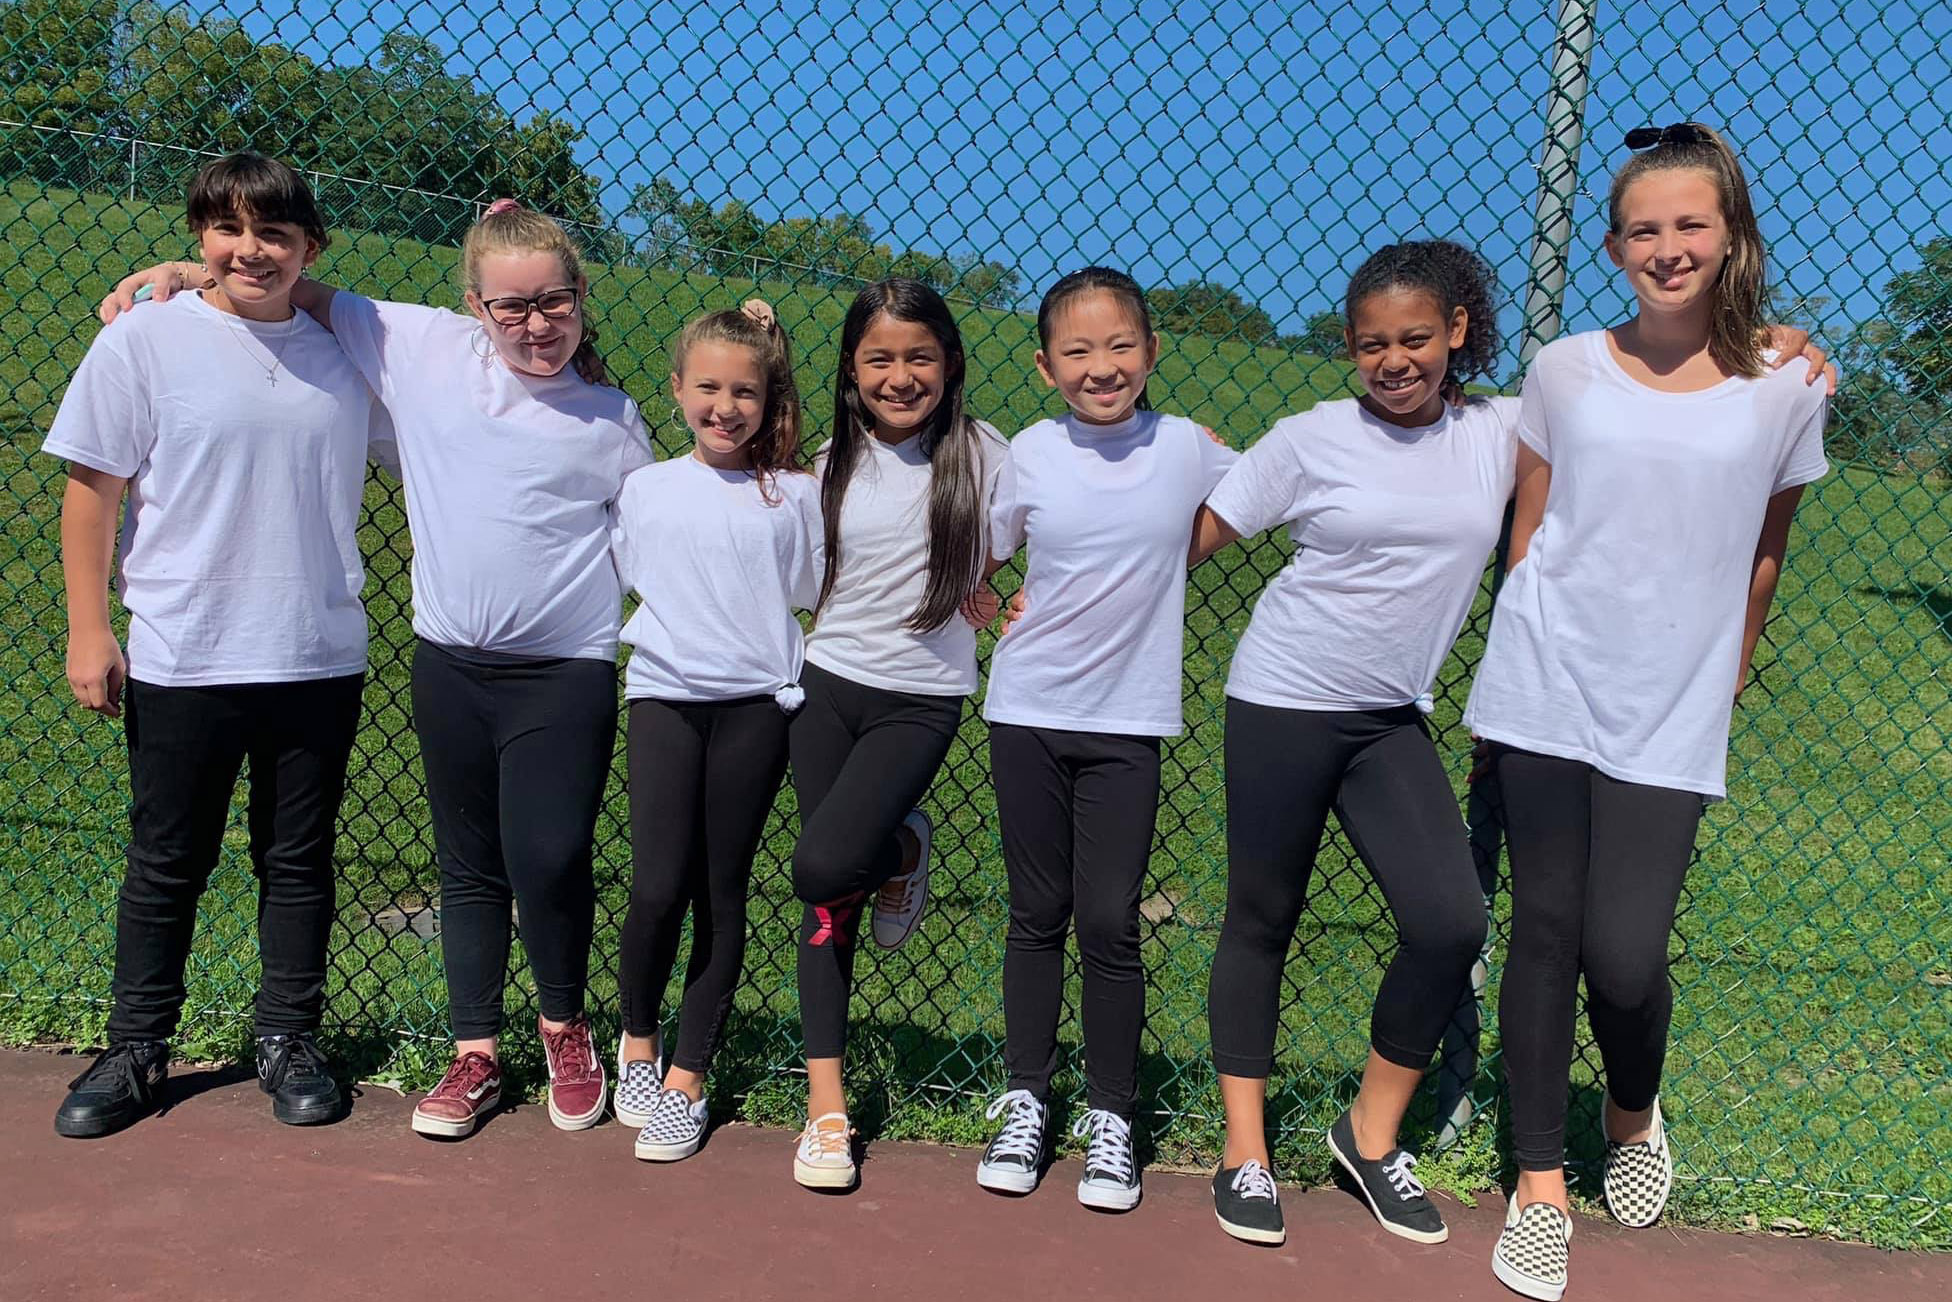 seven girls all wearing white t-shirts and black pants